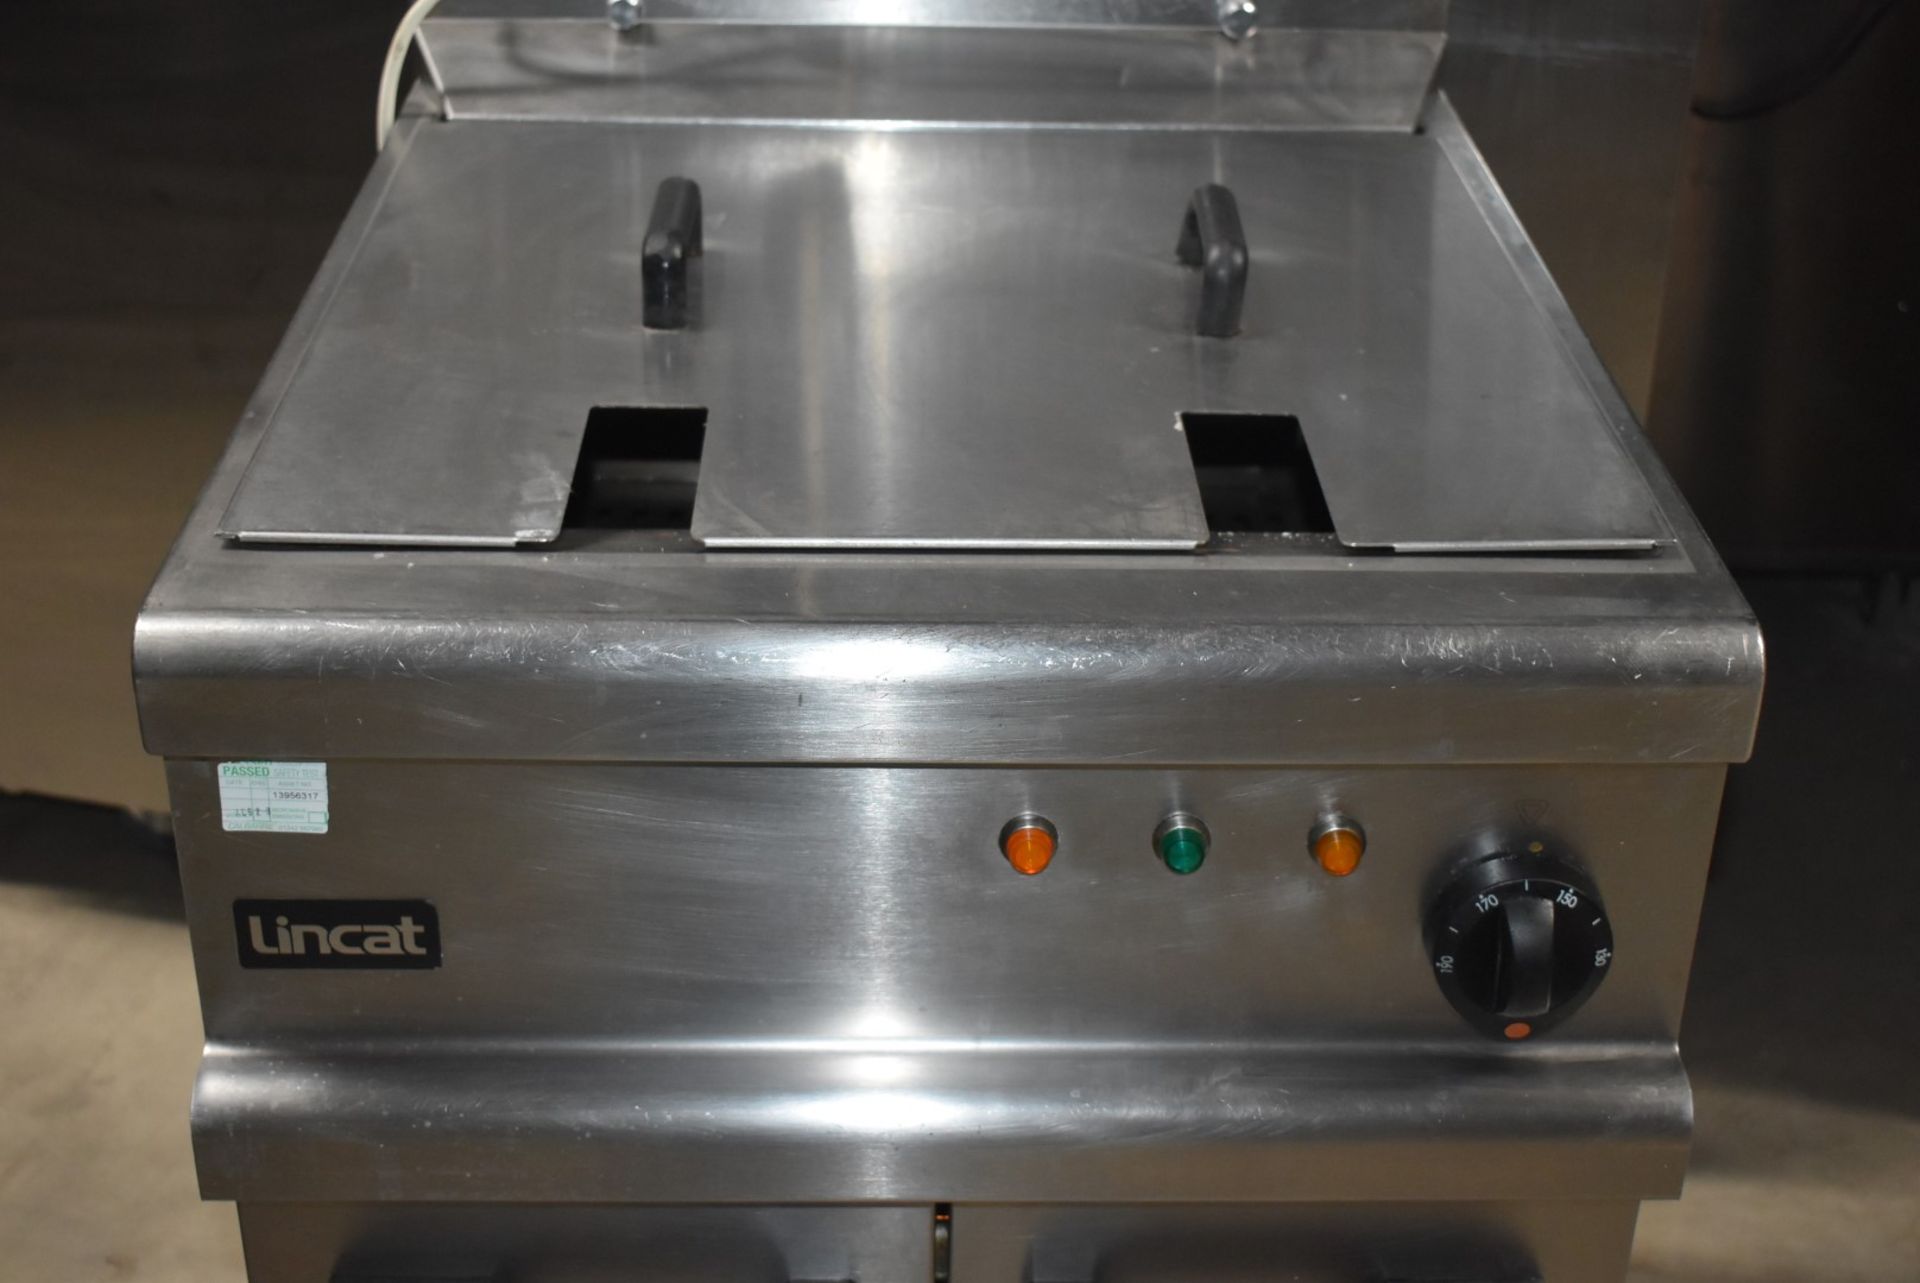 1 x Lincat Opus 700 Single Tank Electric Fryer With Built In Filtration - 3 Phase - Image 6 of 19